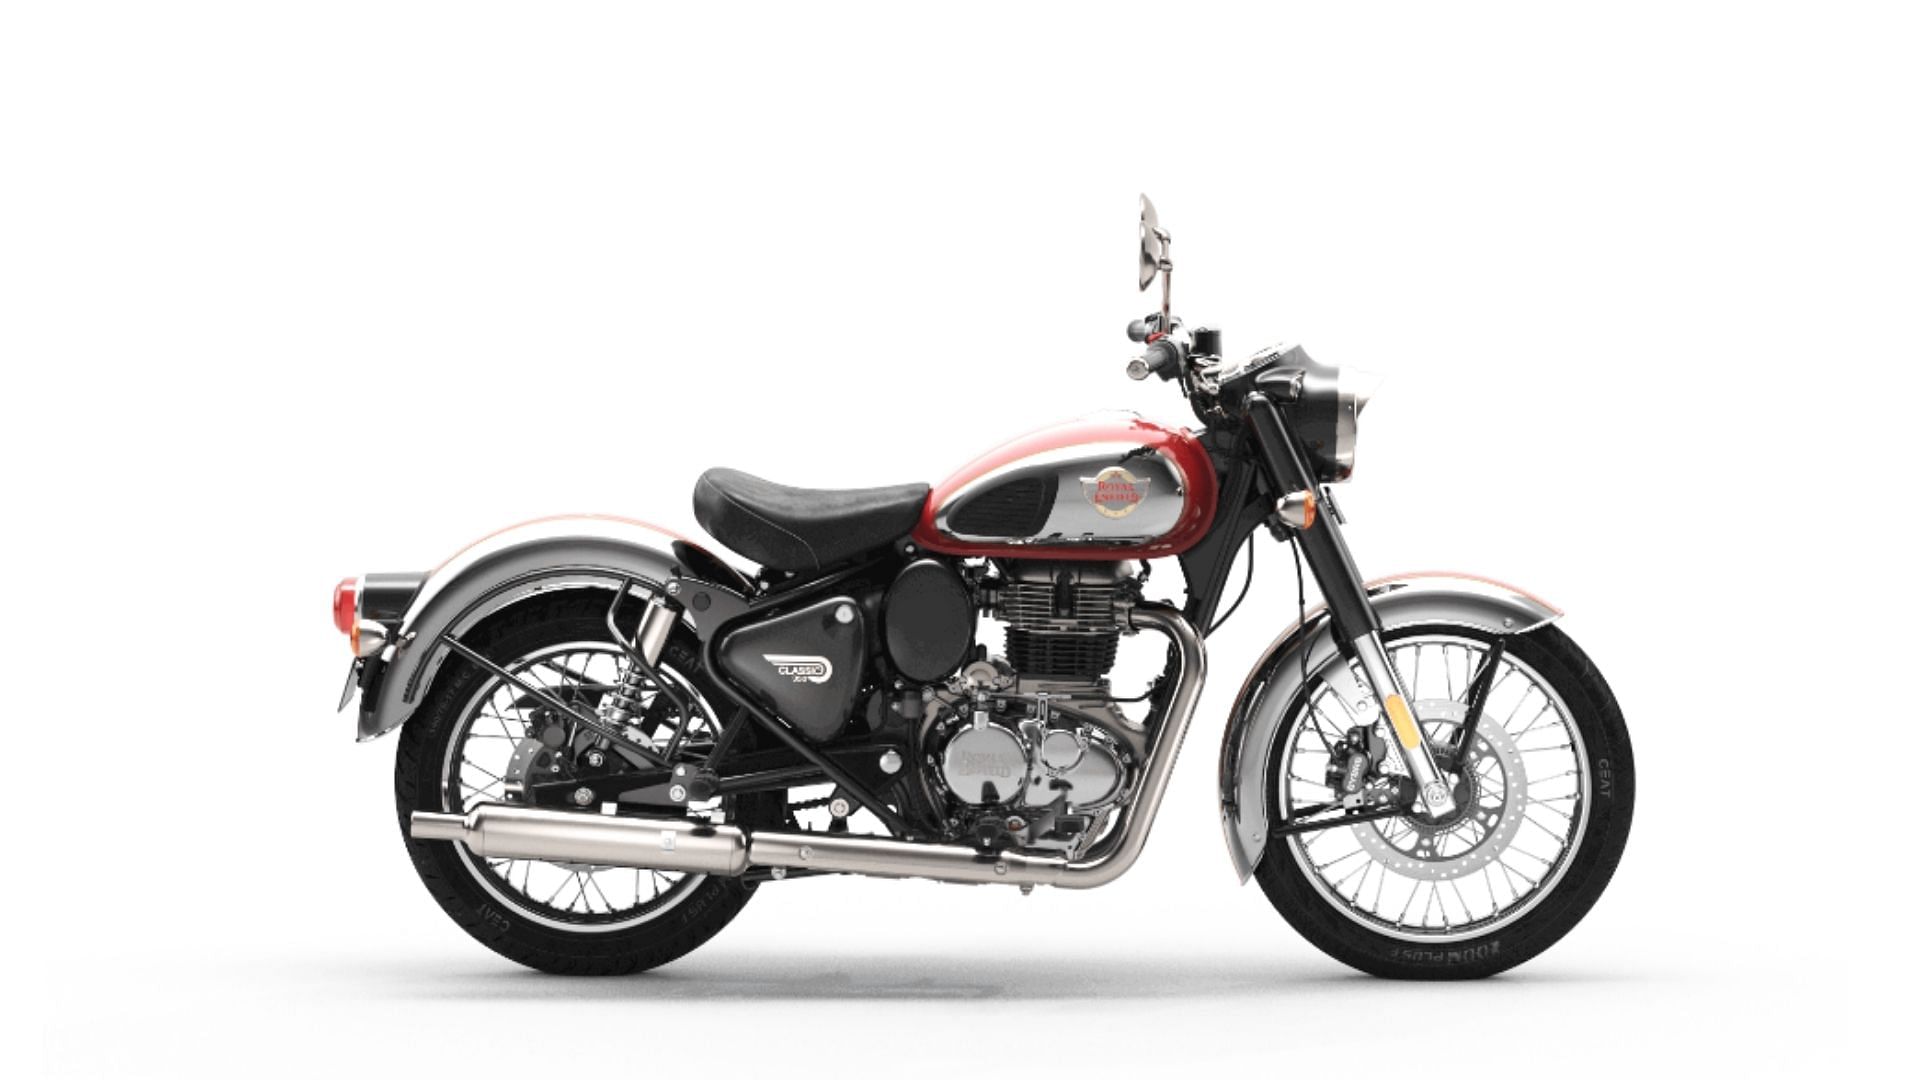 In May this year, Royal Enfield had recalled around 2,36,966 units of Classic, Bullet, and Meteor models in India and various international markets to replace defective ignition coils. Credit: royalenfield.com